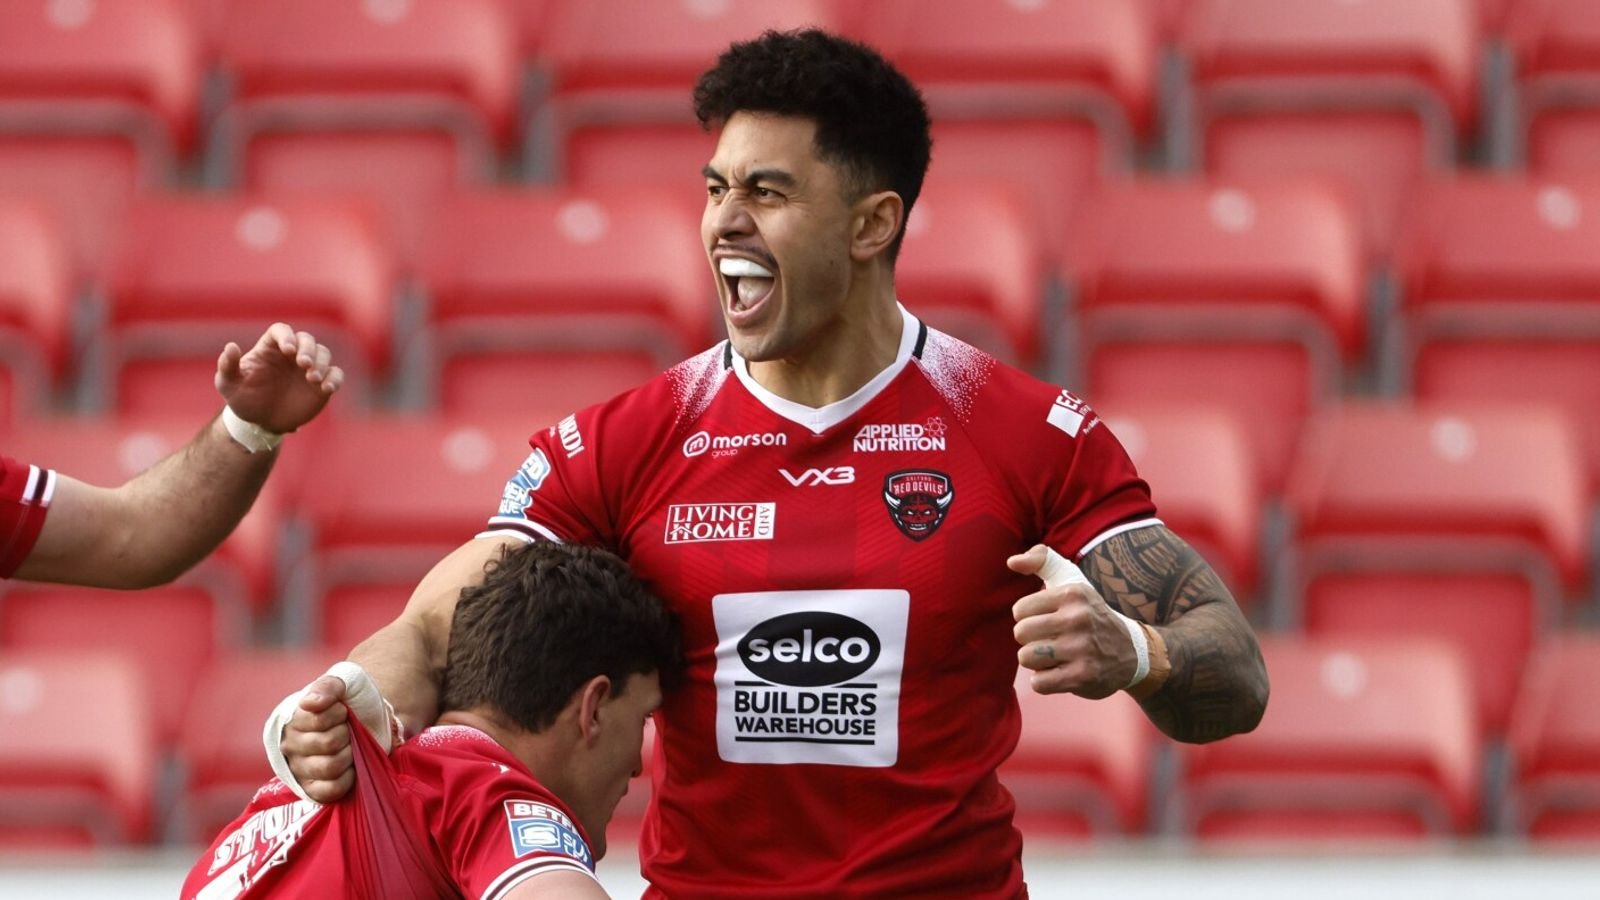 Salford Red Devils 26-22 Castleford Tigers: Sam Stone scores two tries as Red Devils beat Tigers | Rugby League News